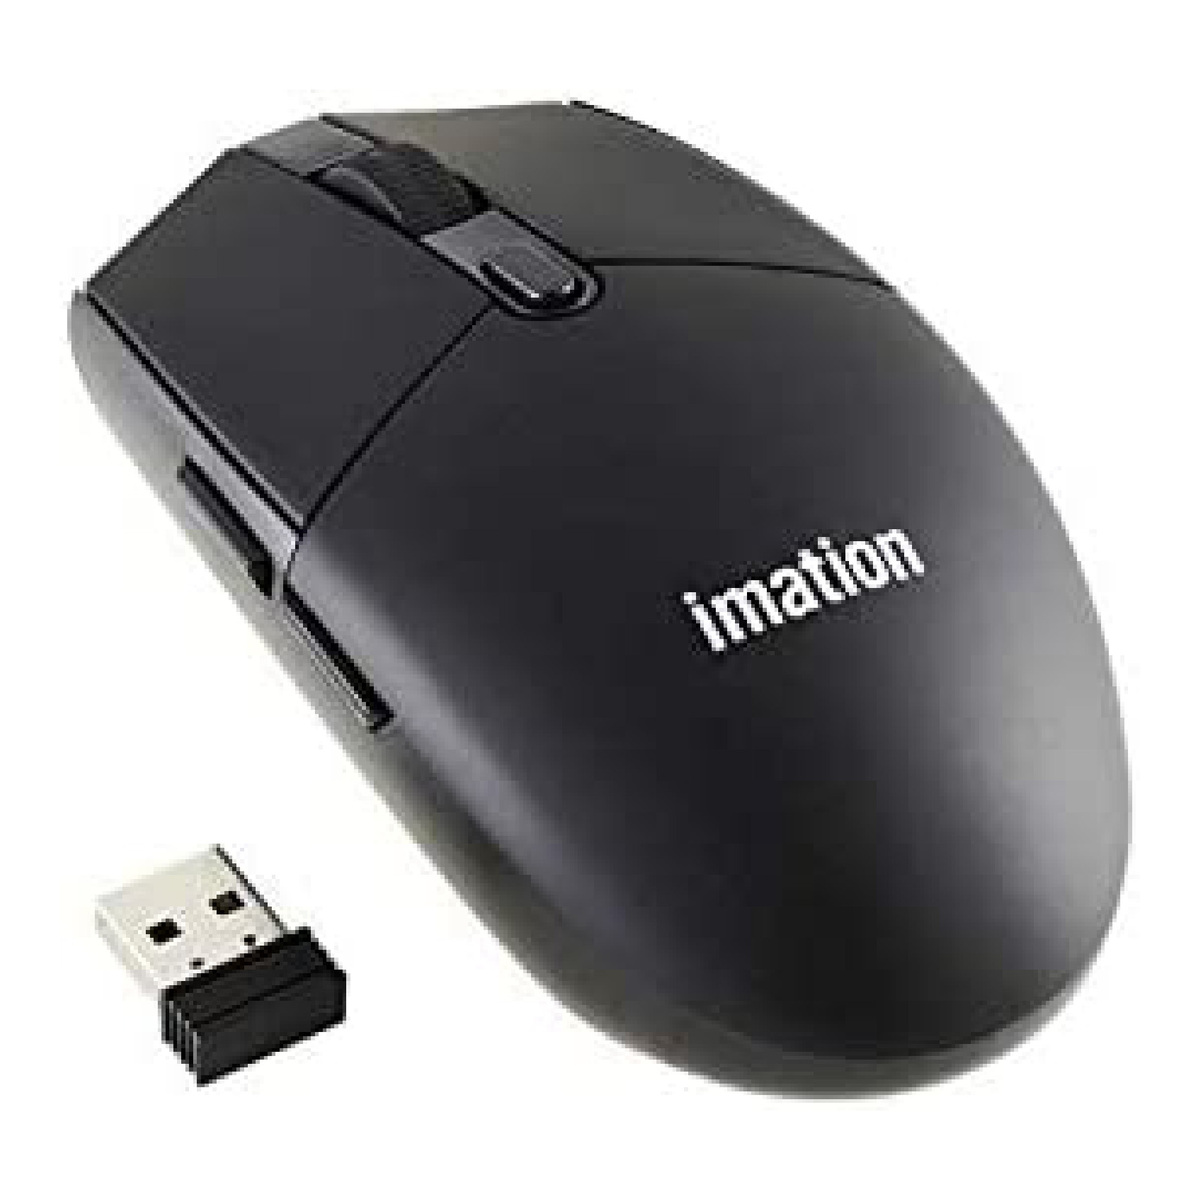 Imation Wireless Mouse WIMO 6D